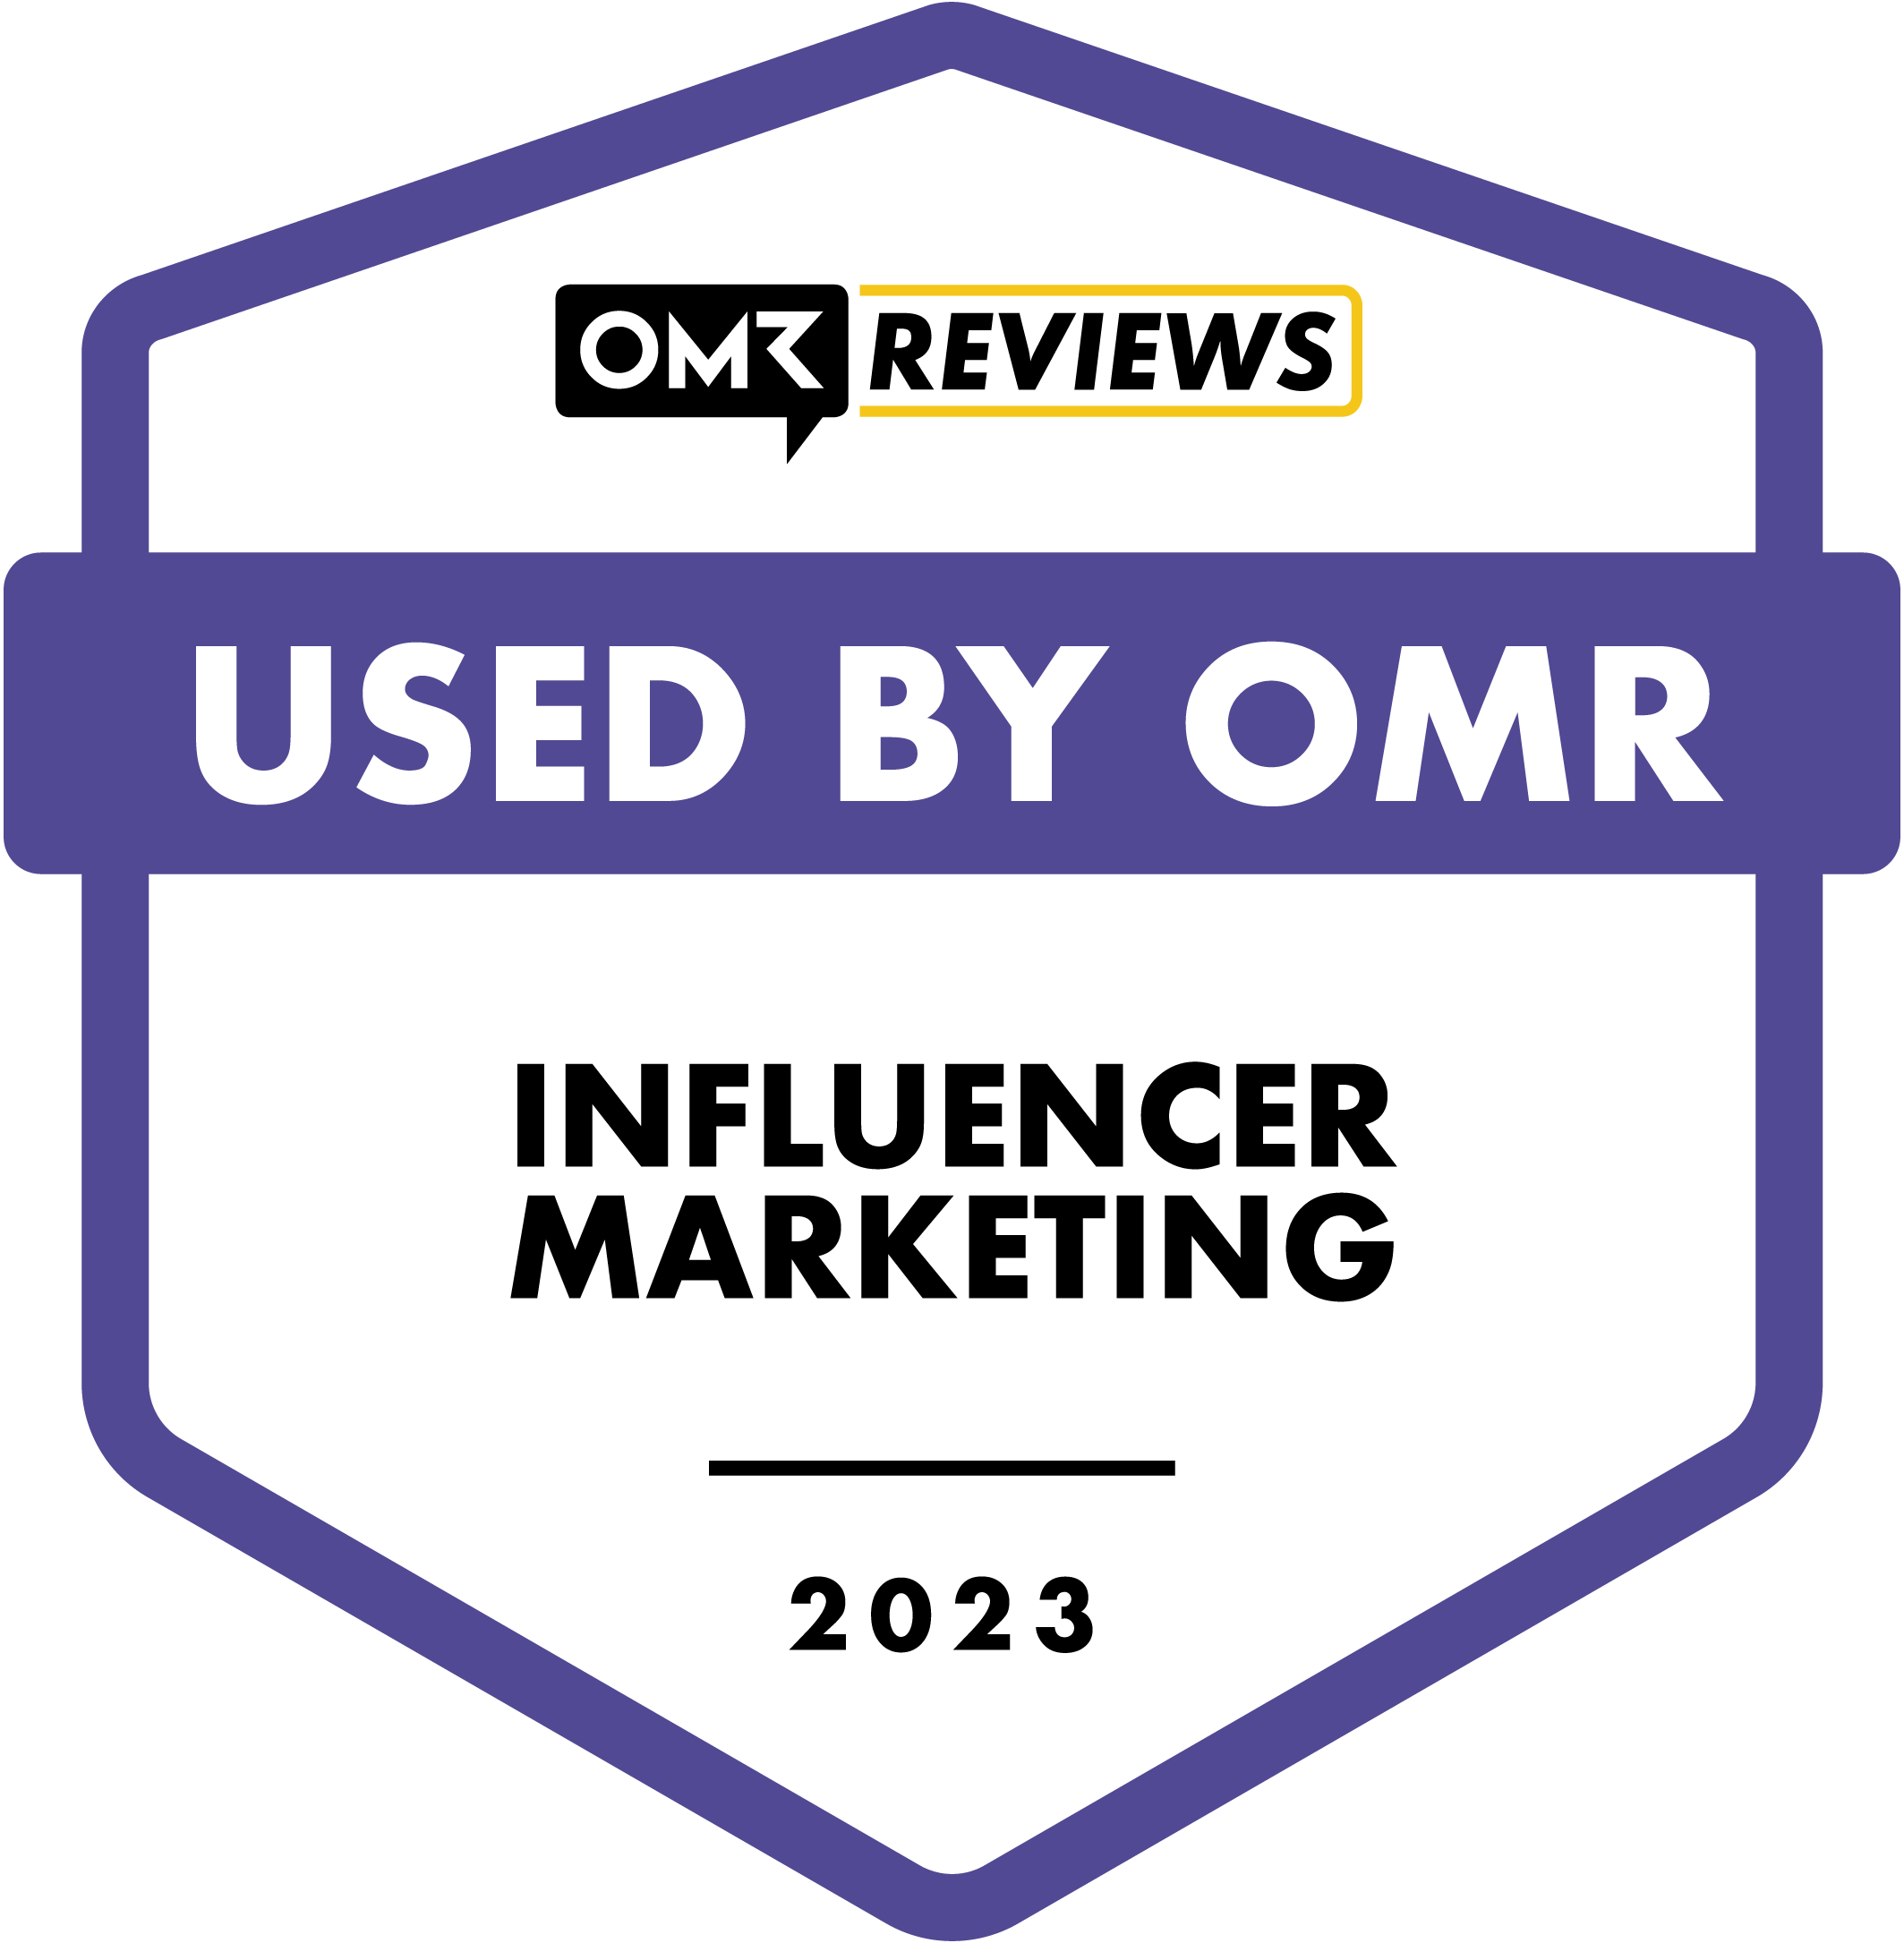 Used by OMR Influencer Marketing Badge